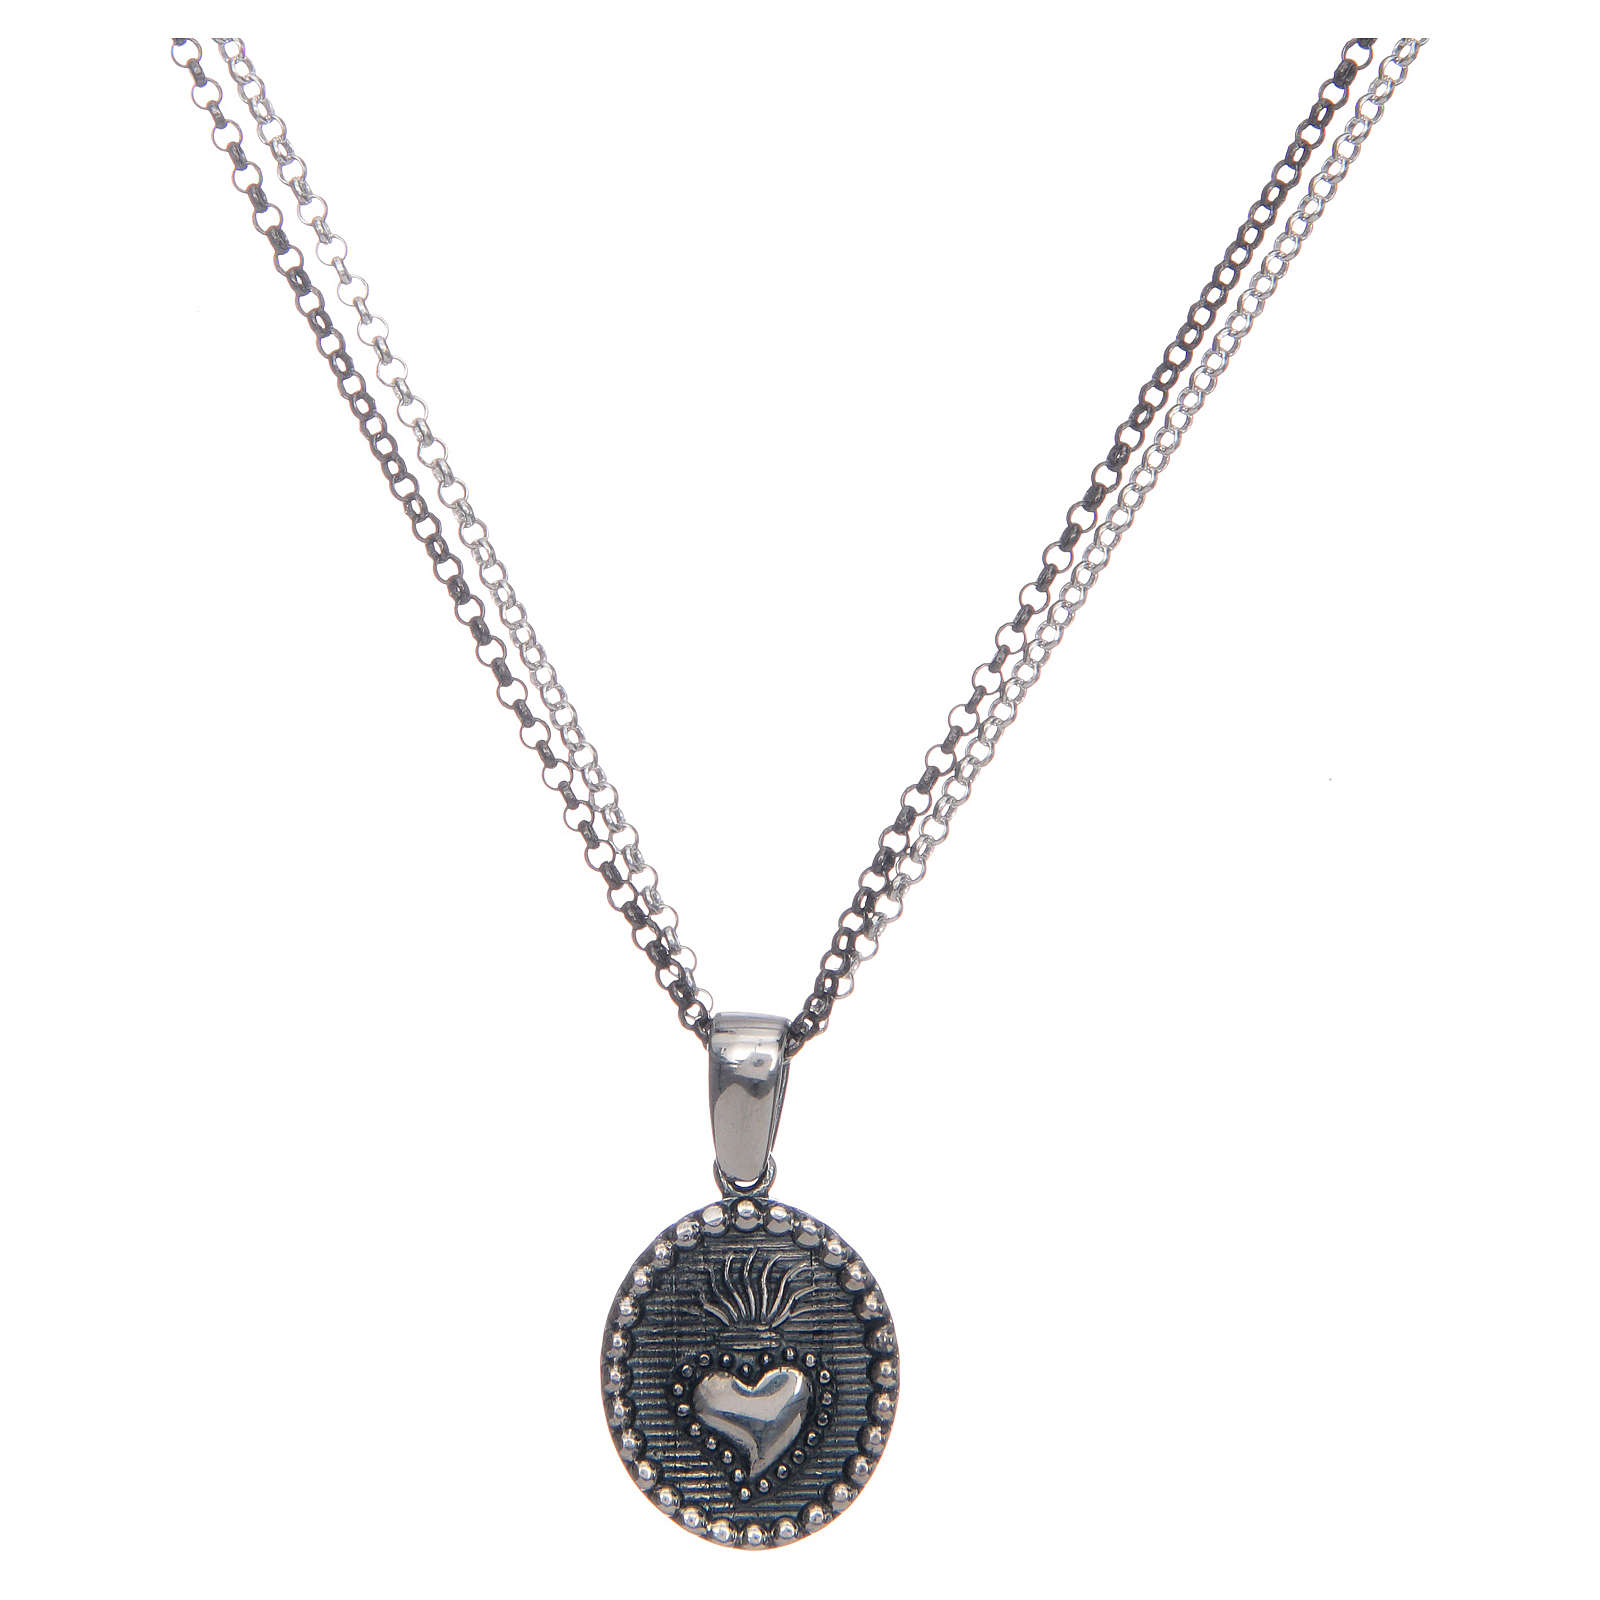 Amen necklace with Sacred Heart pendant in silver | online sales on ...